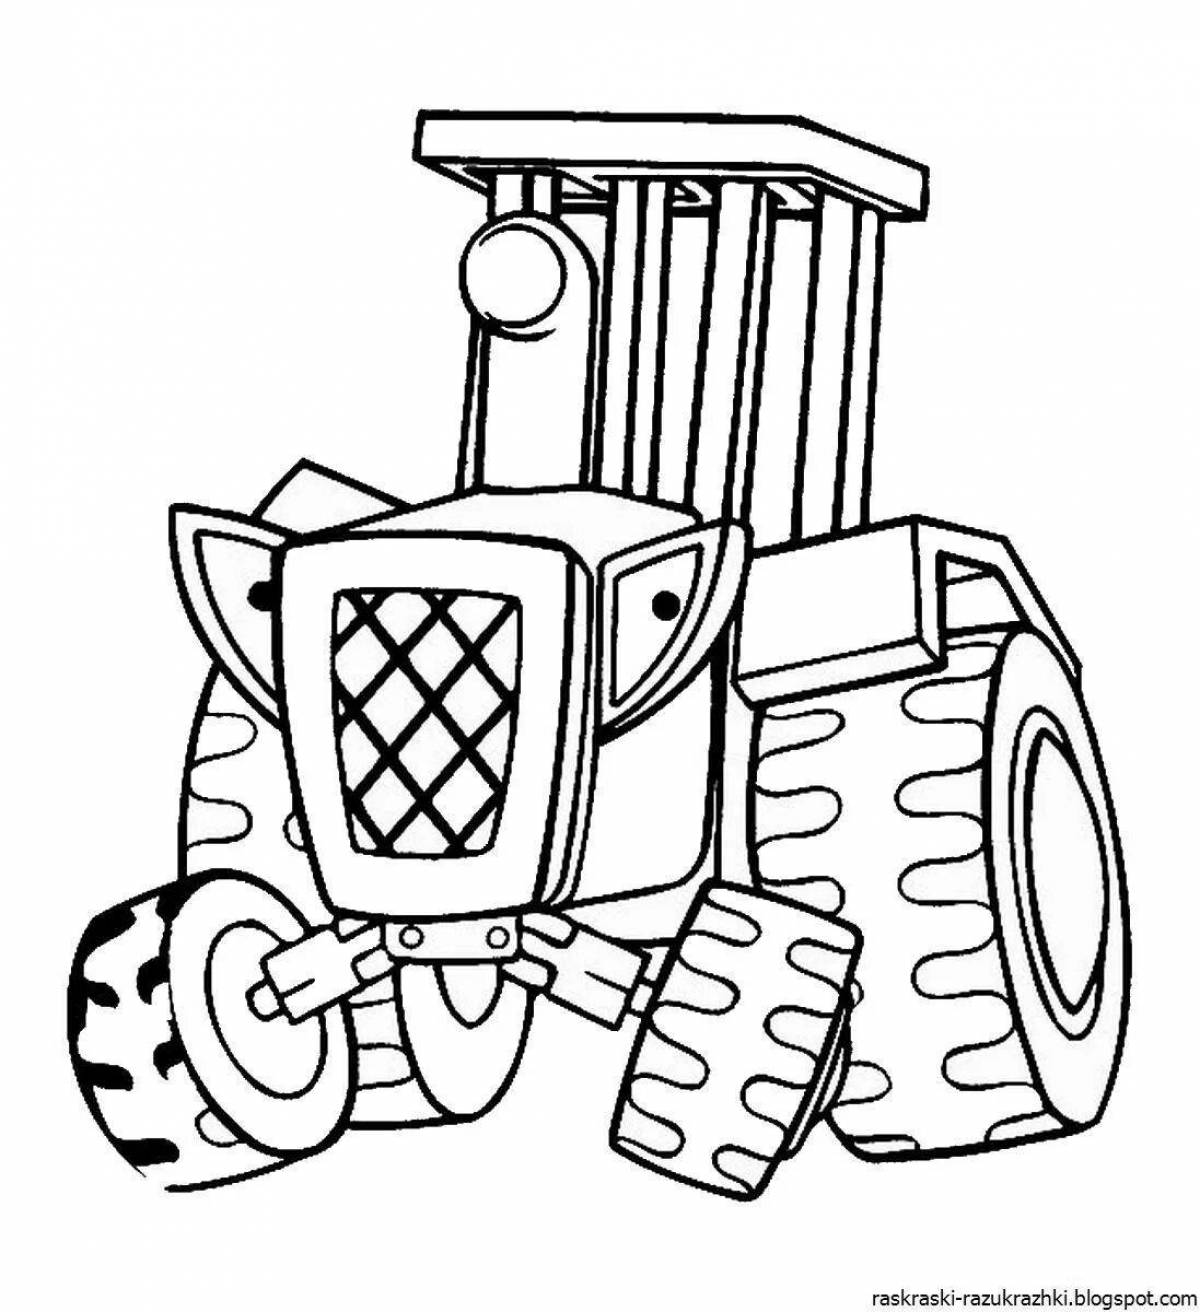 Live tractor coloring page